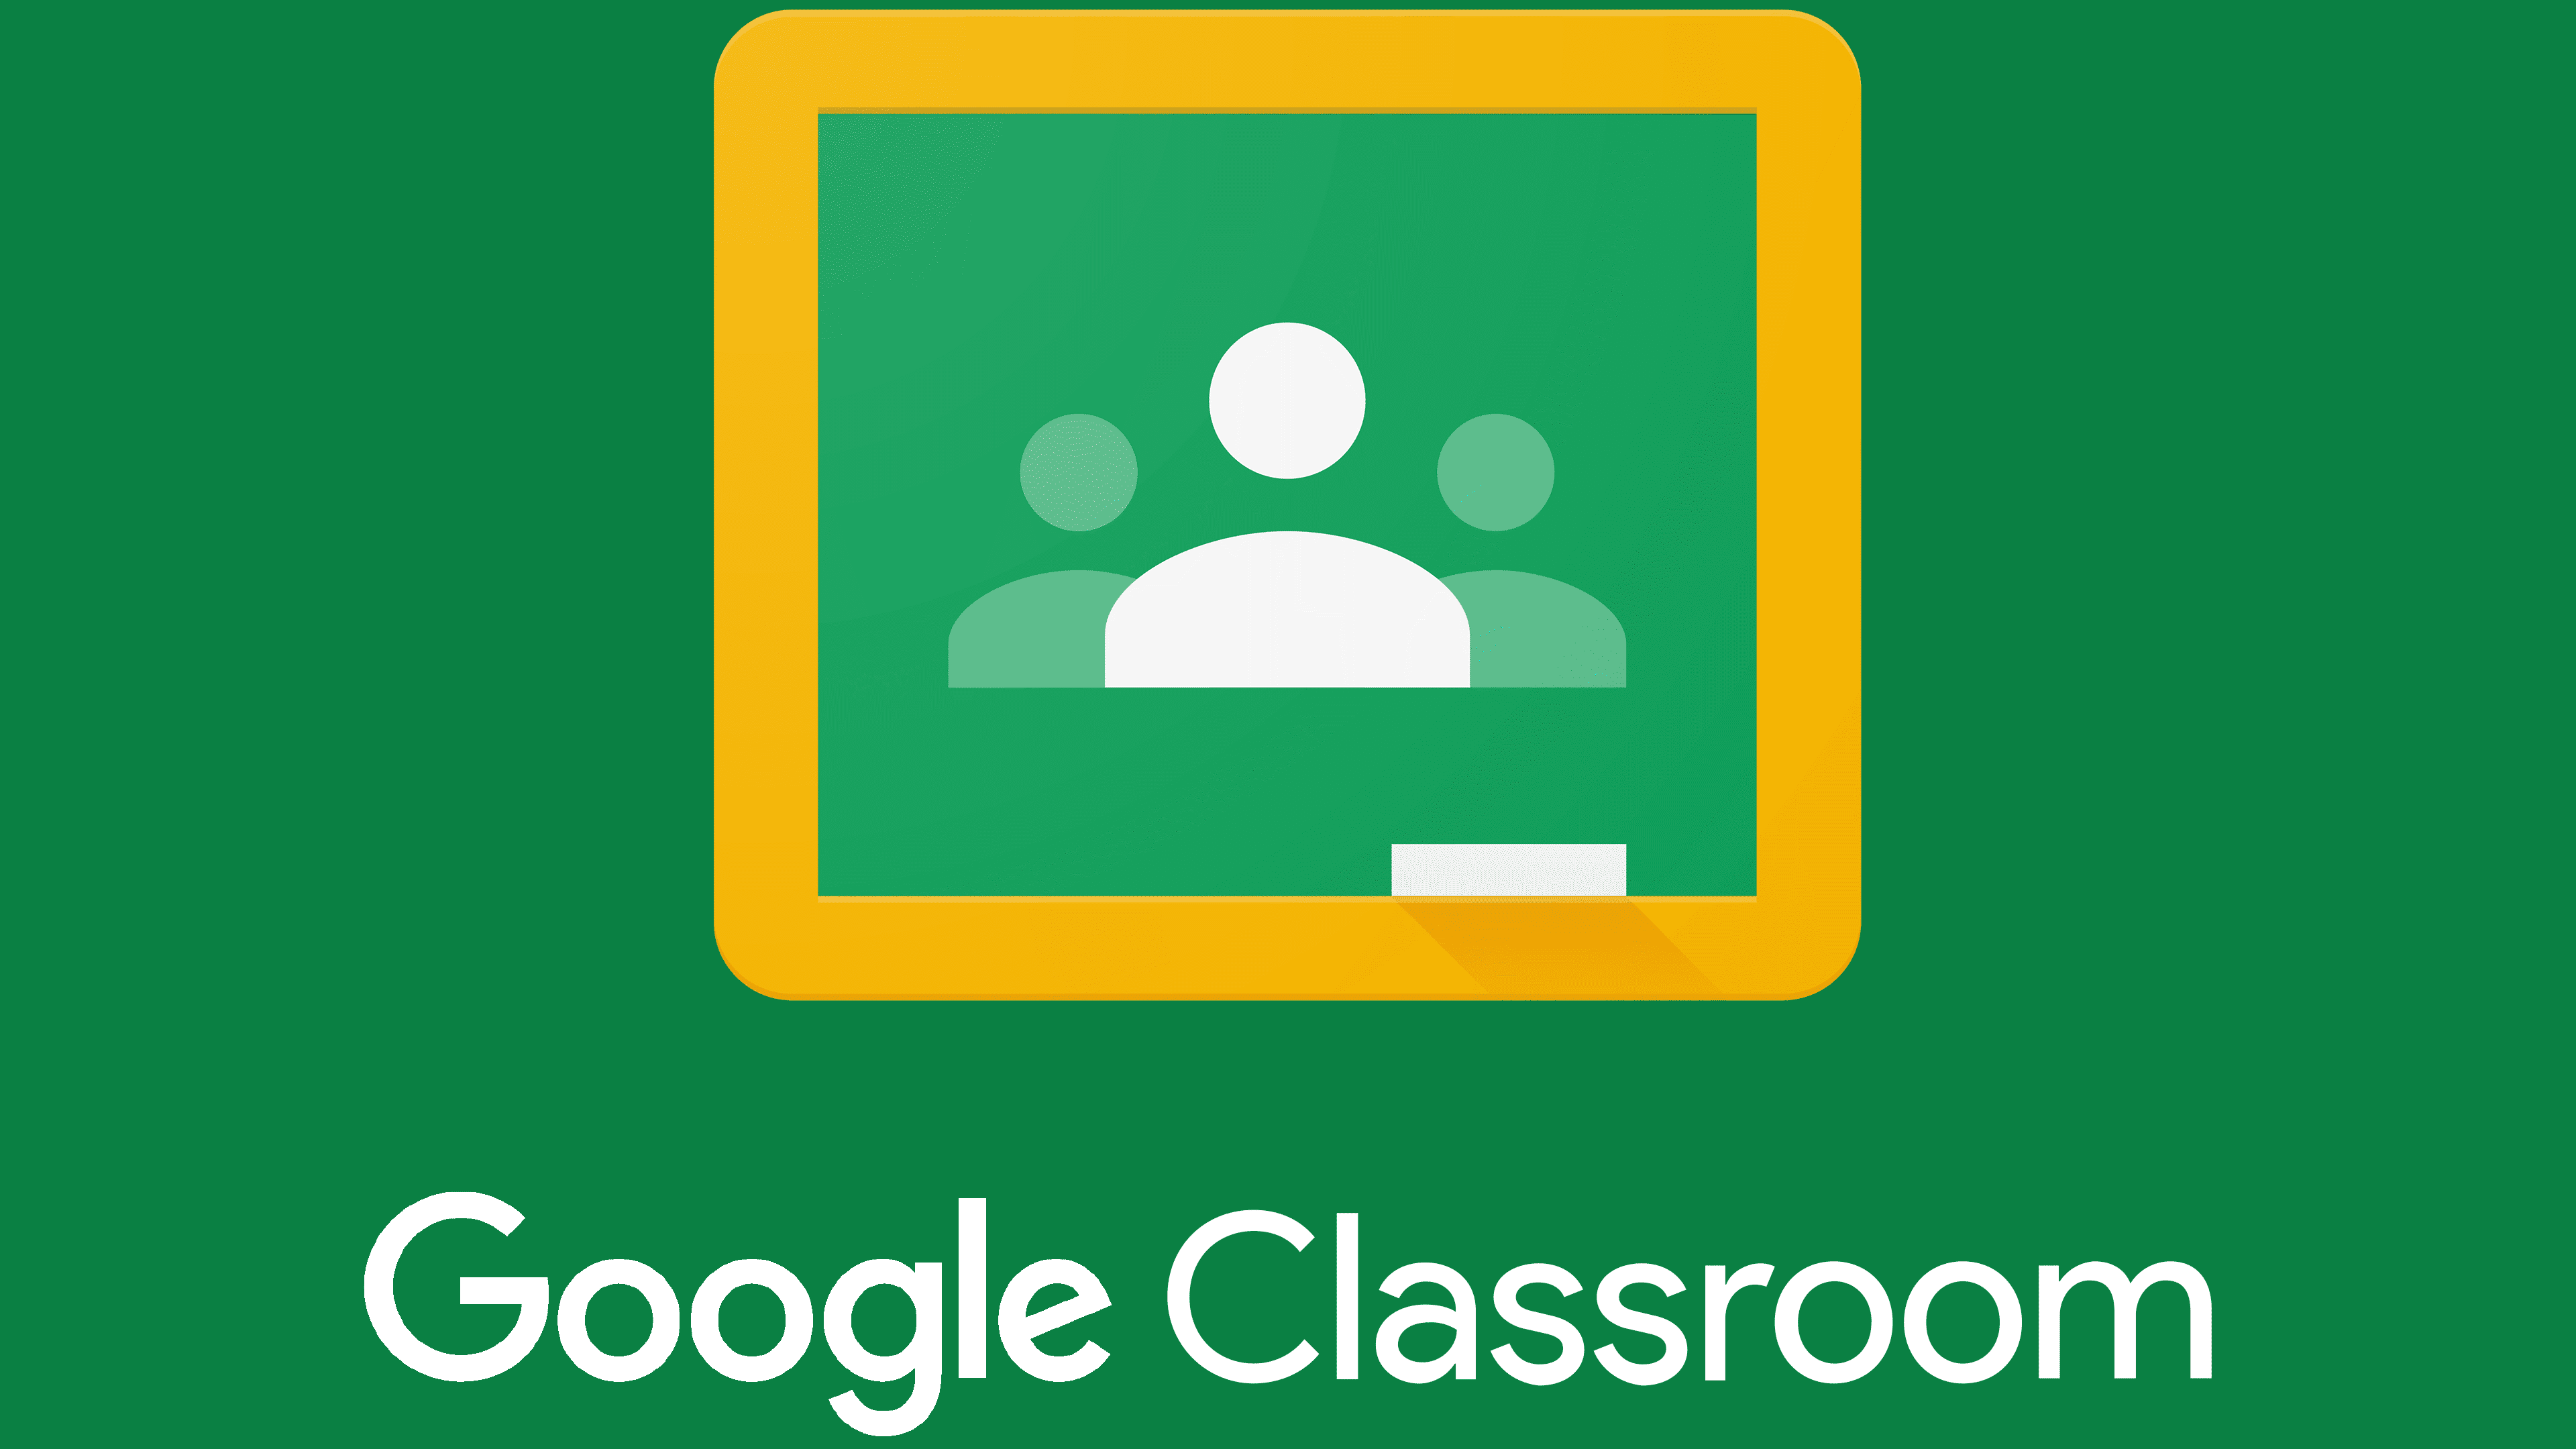 How should students be using Google Classroom?